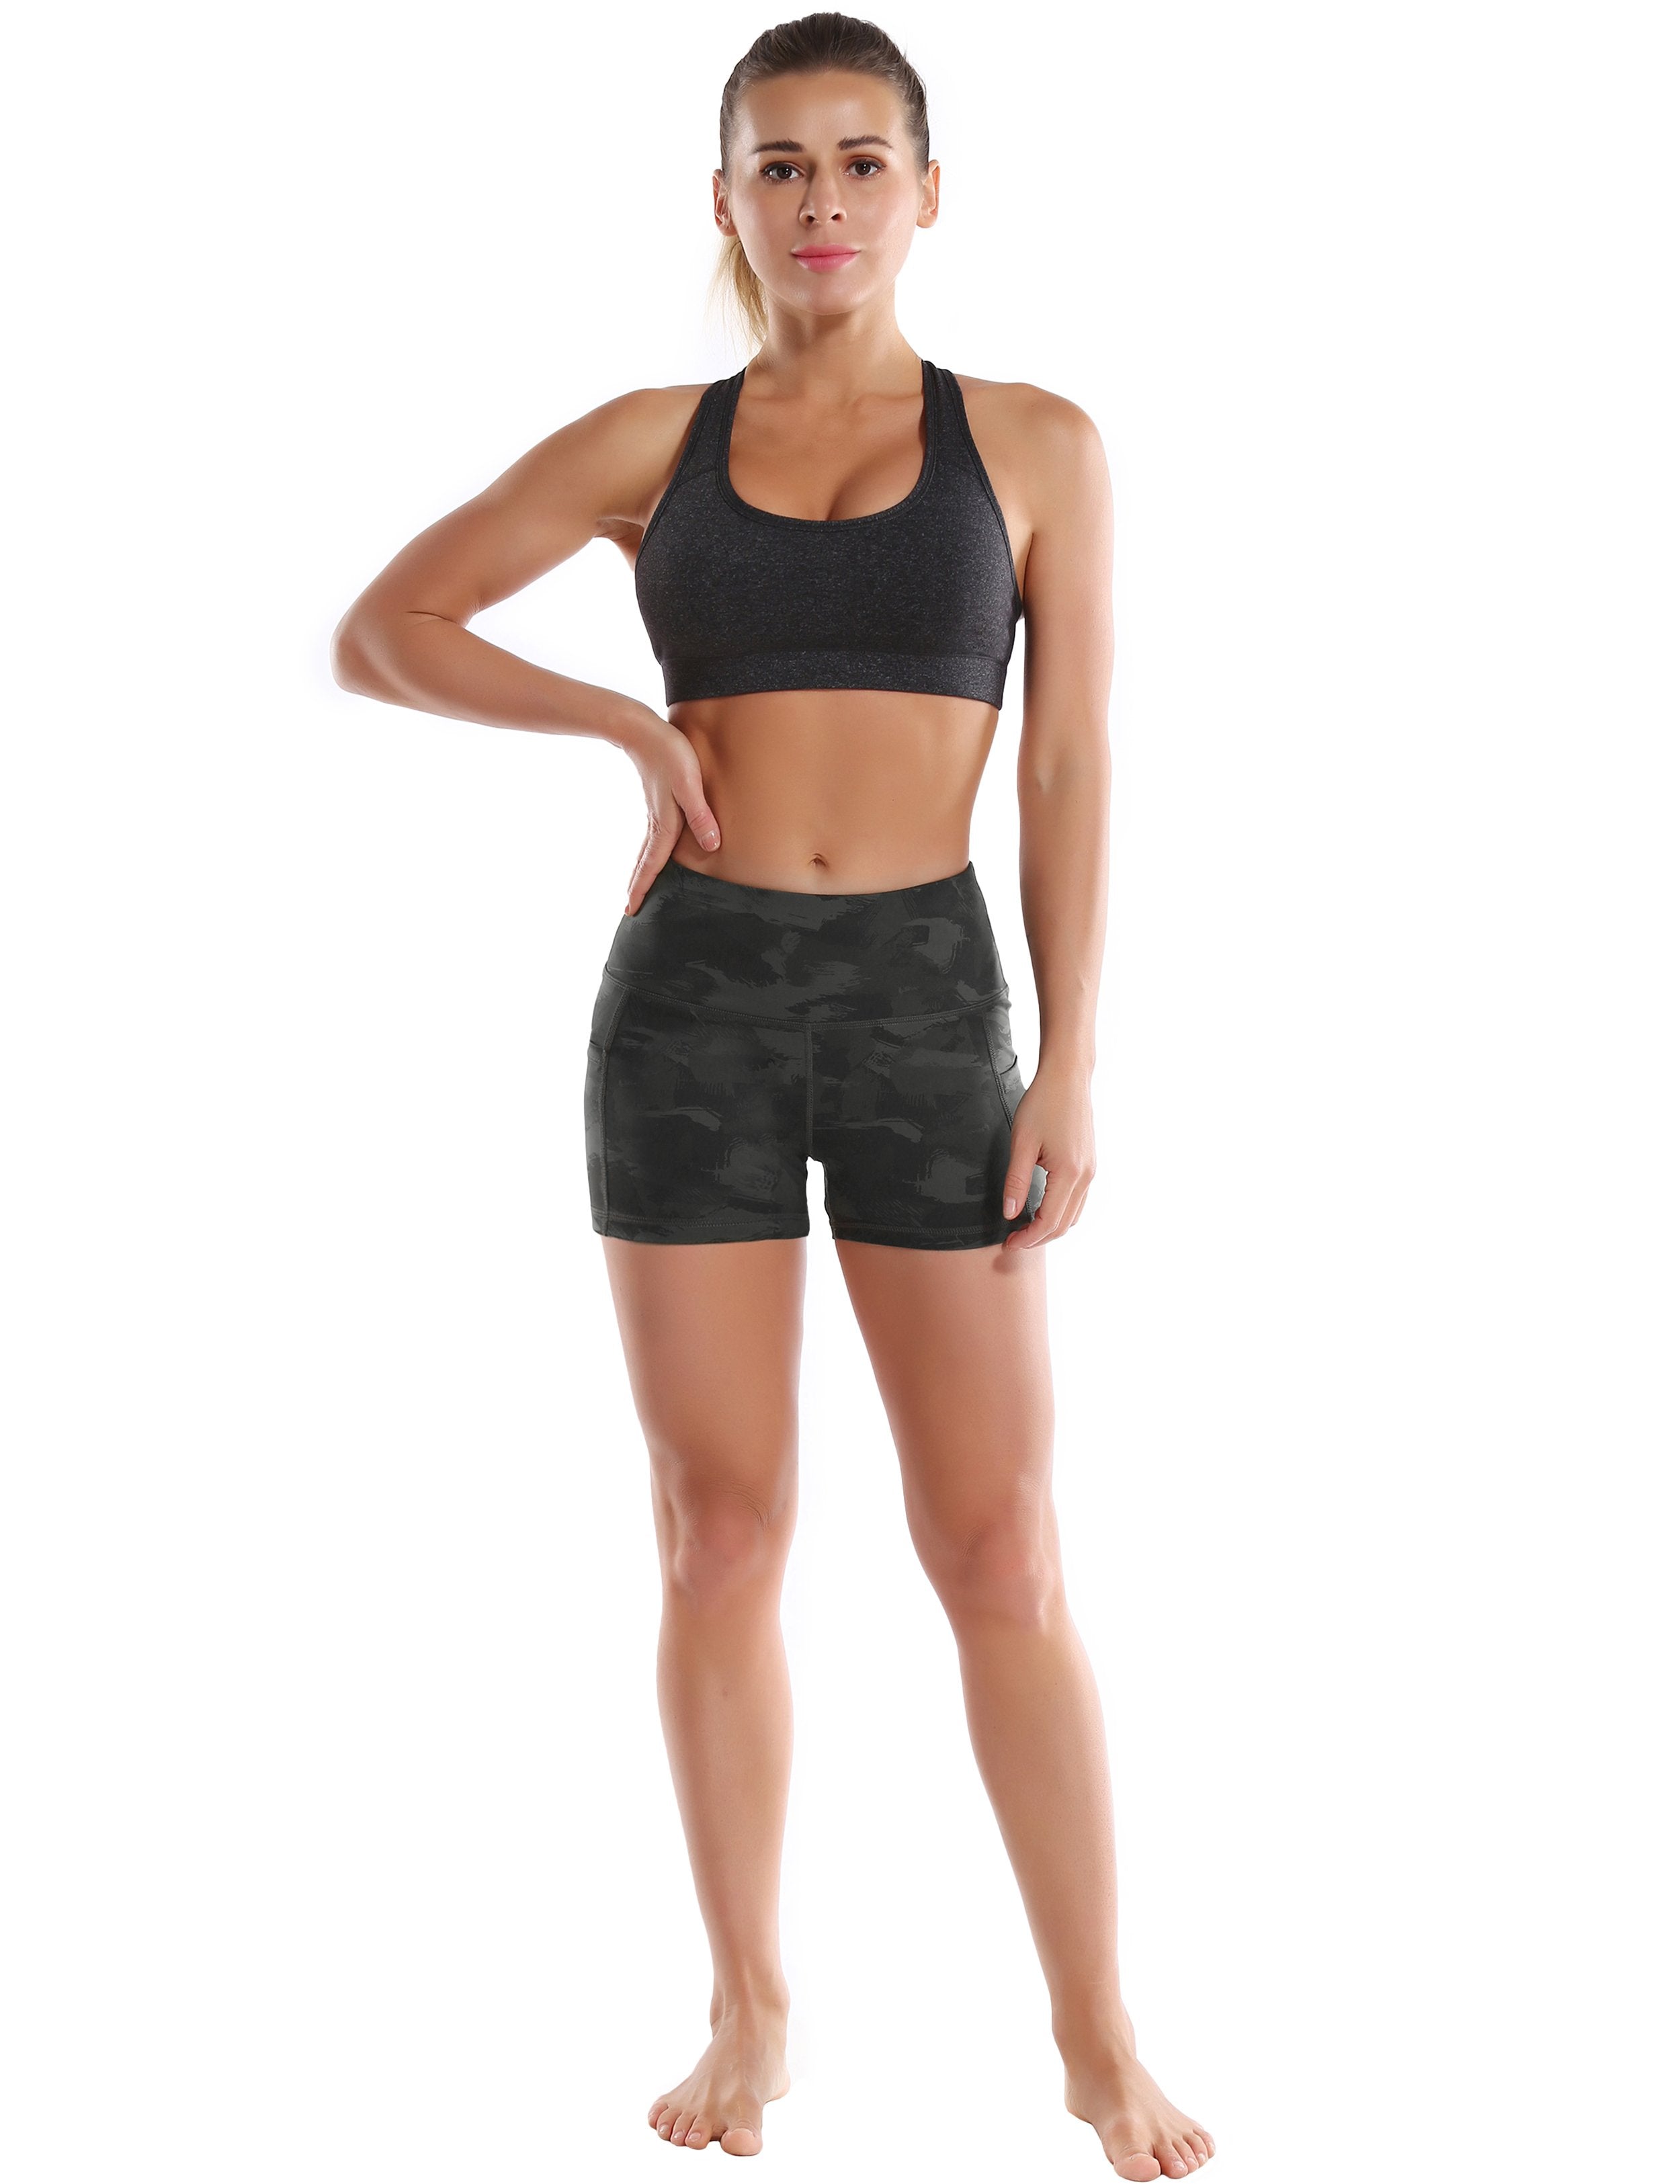 2.5" Printed Side Pockets Tall Size Shorts dimgray brushcamo Sleek, soft, smooth and totally comfortable: our newest sexy style is here. Softest-ever fabric High elasticity High density 4-way stretch Fabric doesn't attract lint easily No see-through Moisture-wicking Machine wash 78% Polyester, 22% Spandex